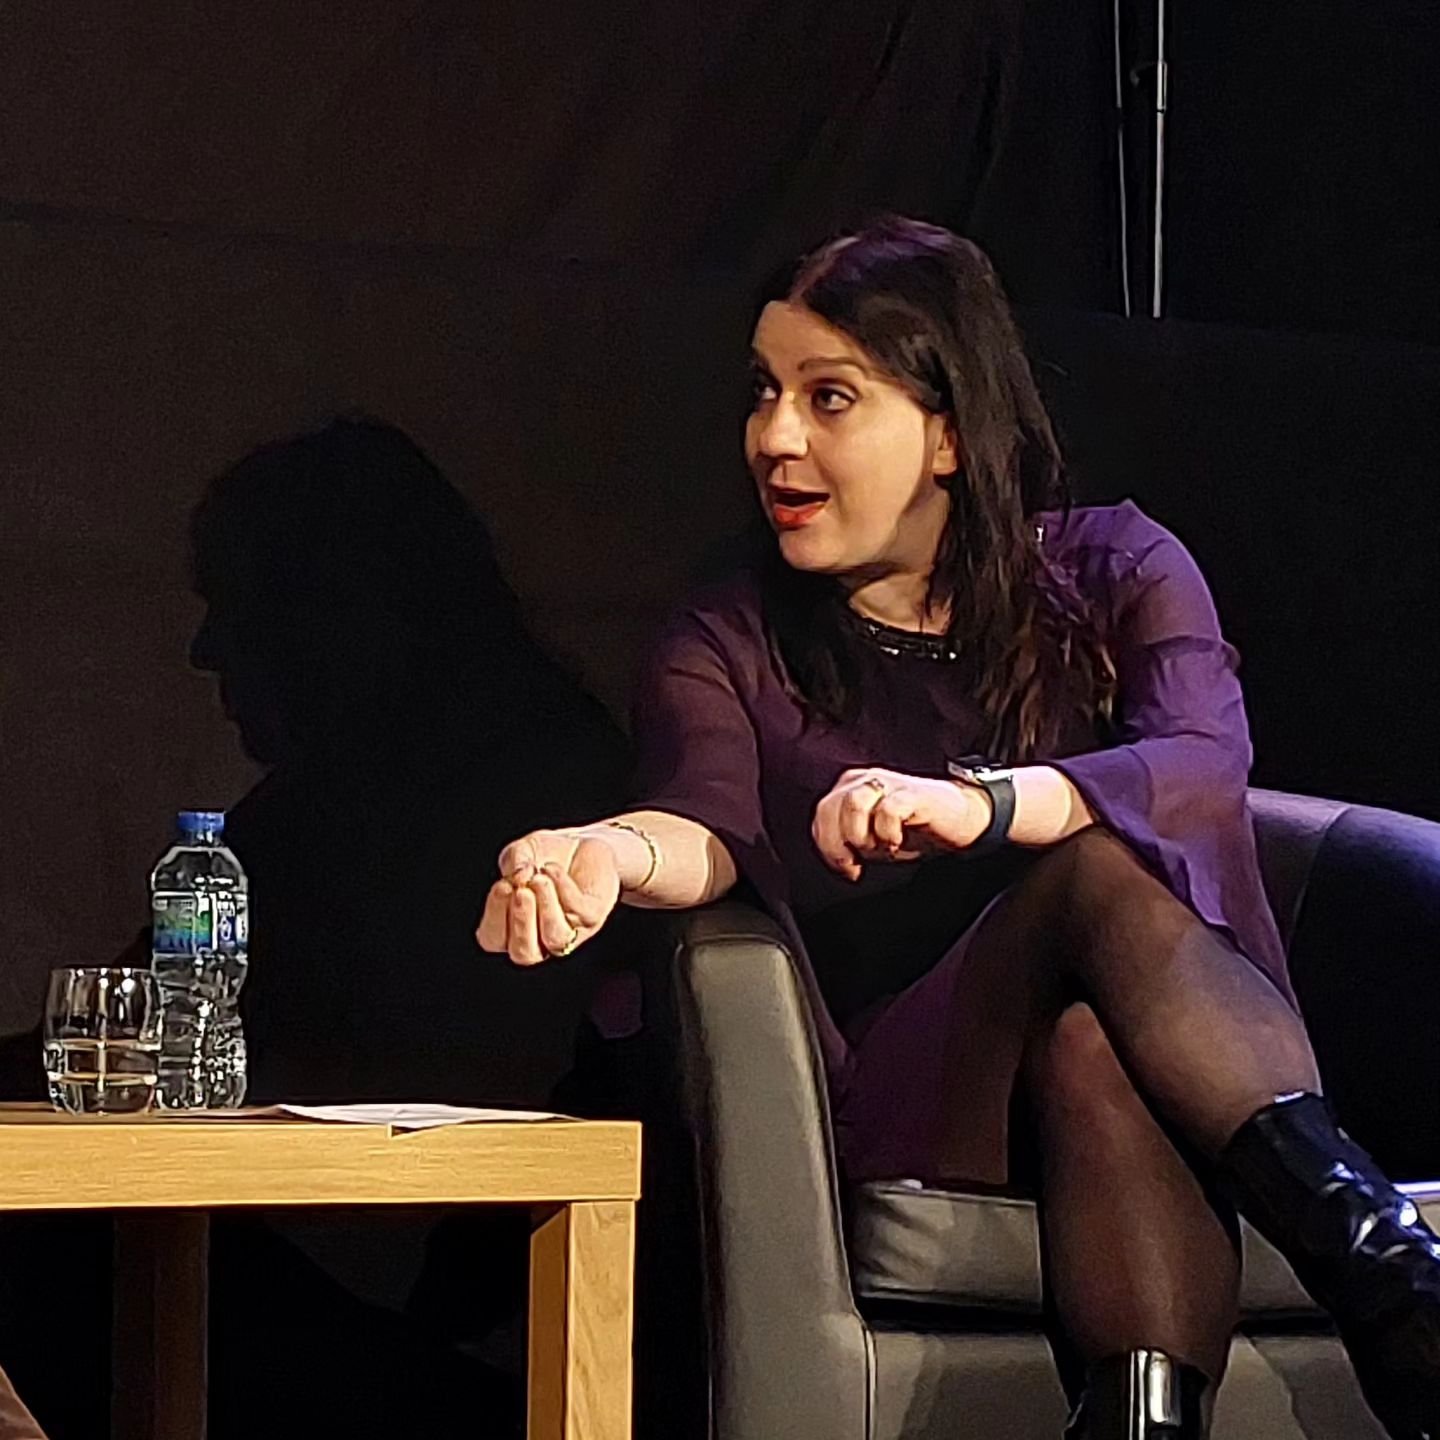 @drjaninaramirez in full swing at today's @gloshistfest. What a great festival - fabulously friendly, wonderfully well organised with a great line up in a stunning venue. And this was just the spring warm up! Just wait till September when the full 16